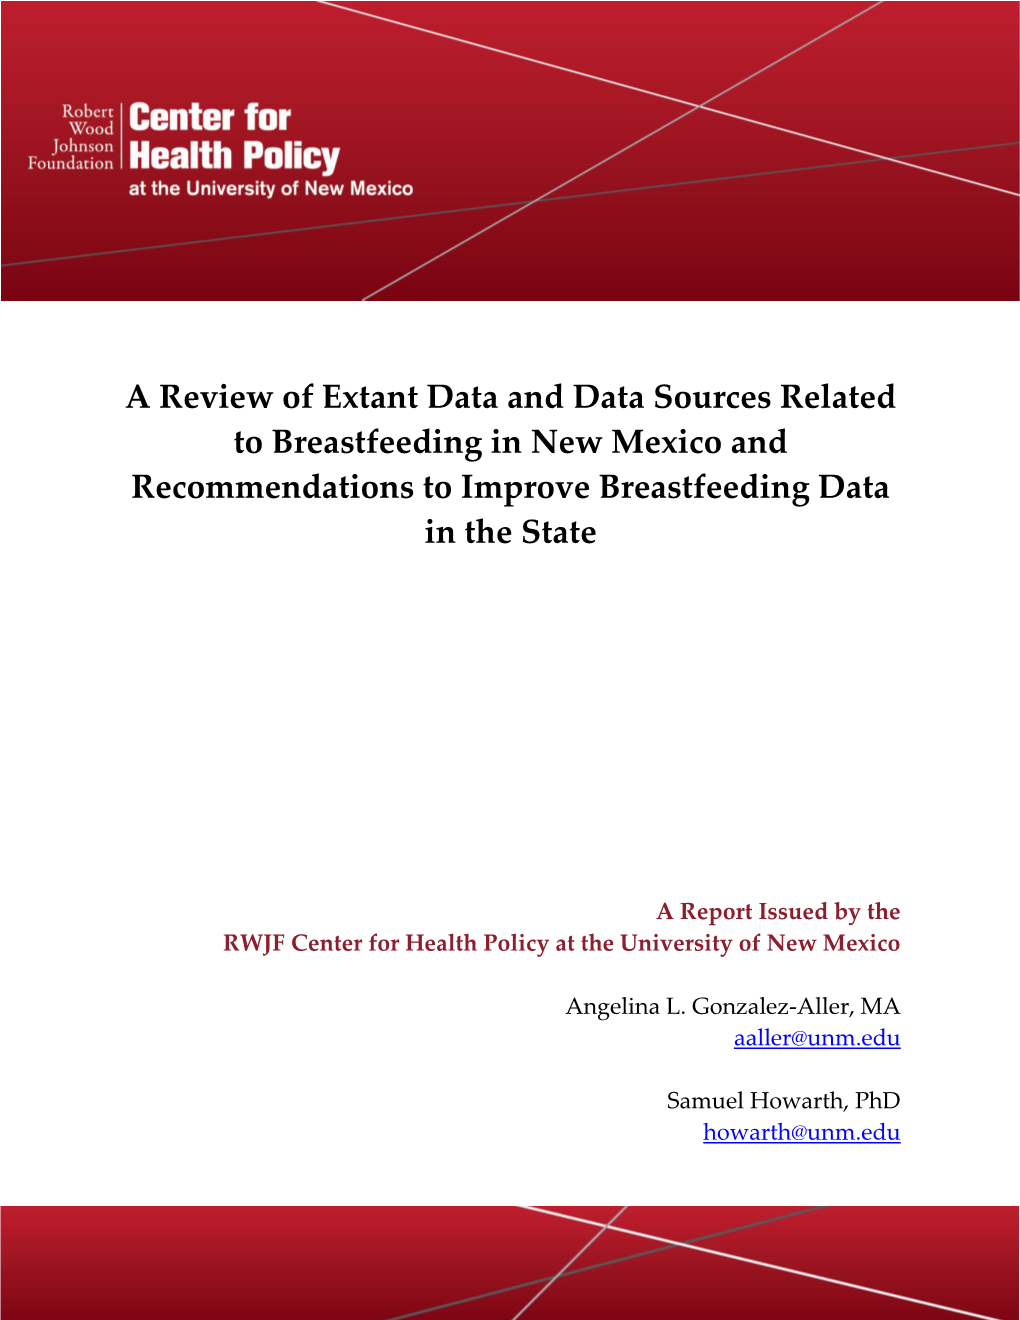 A Review of Extant Data and Data Sources Related to Breastfeeding in New Mexico and Recommendations to Improve Breastfeeding Data in the State